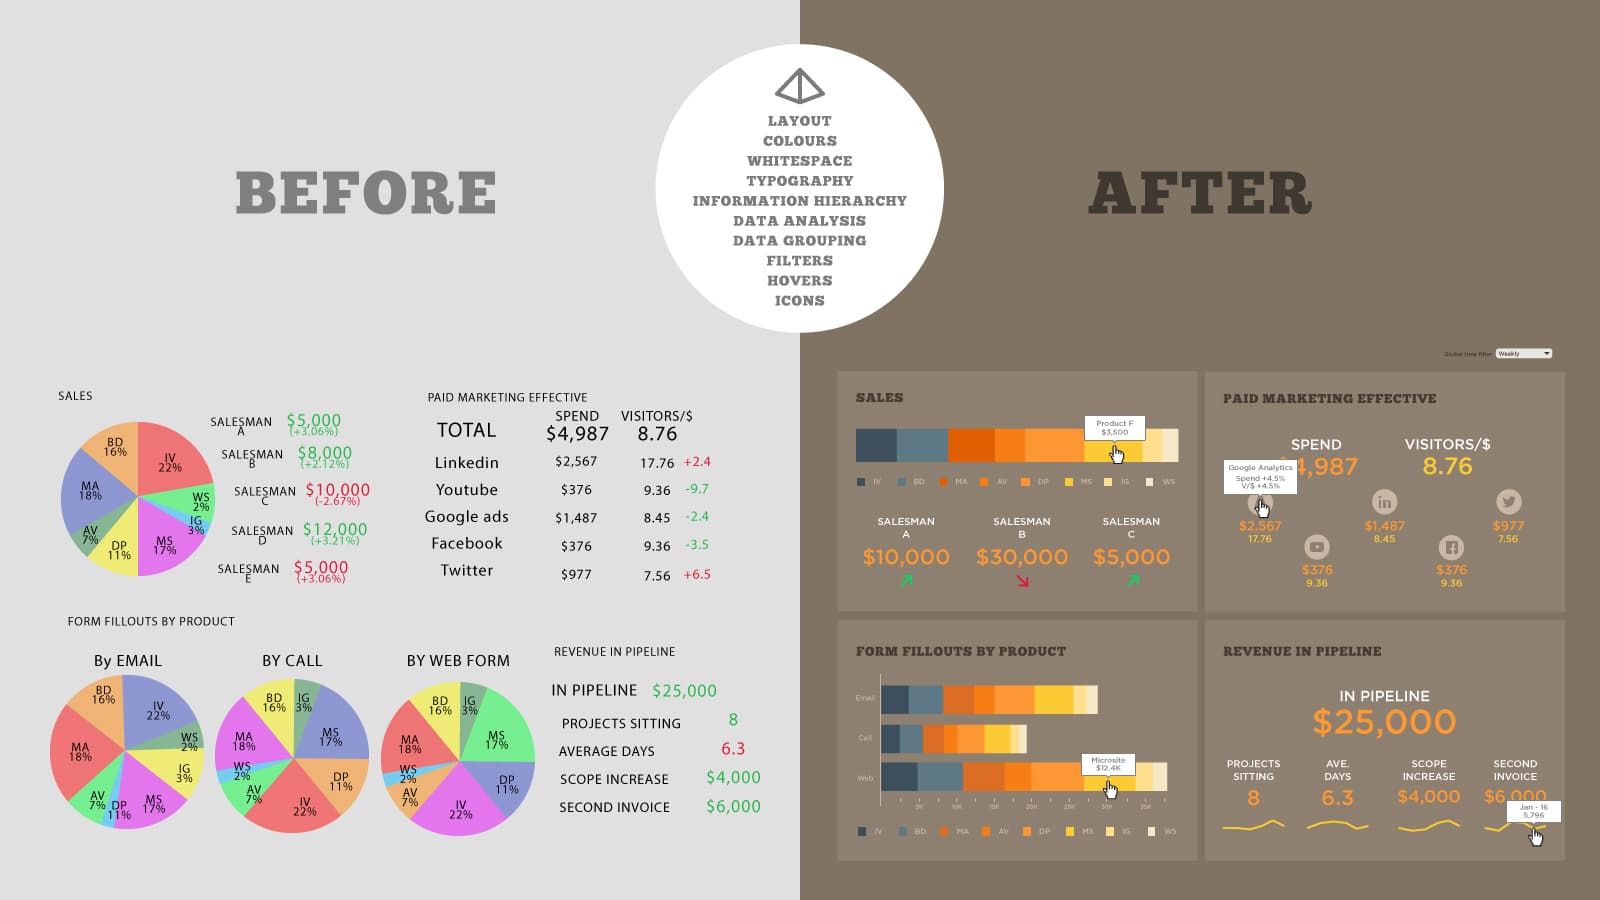 Image of before and after data visualization brand guidelines